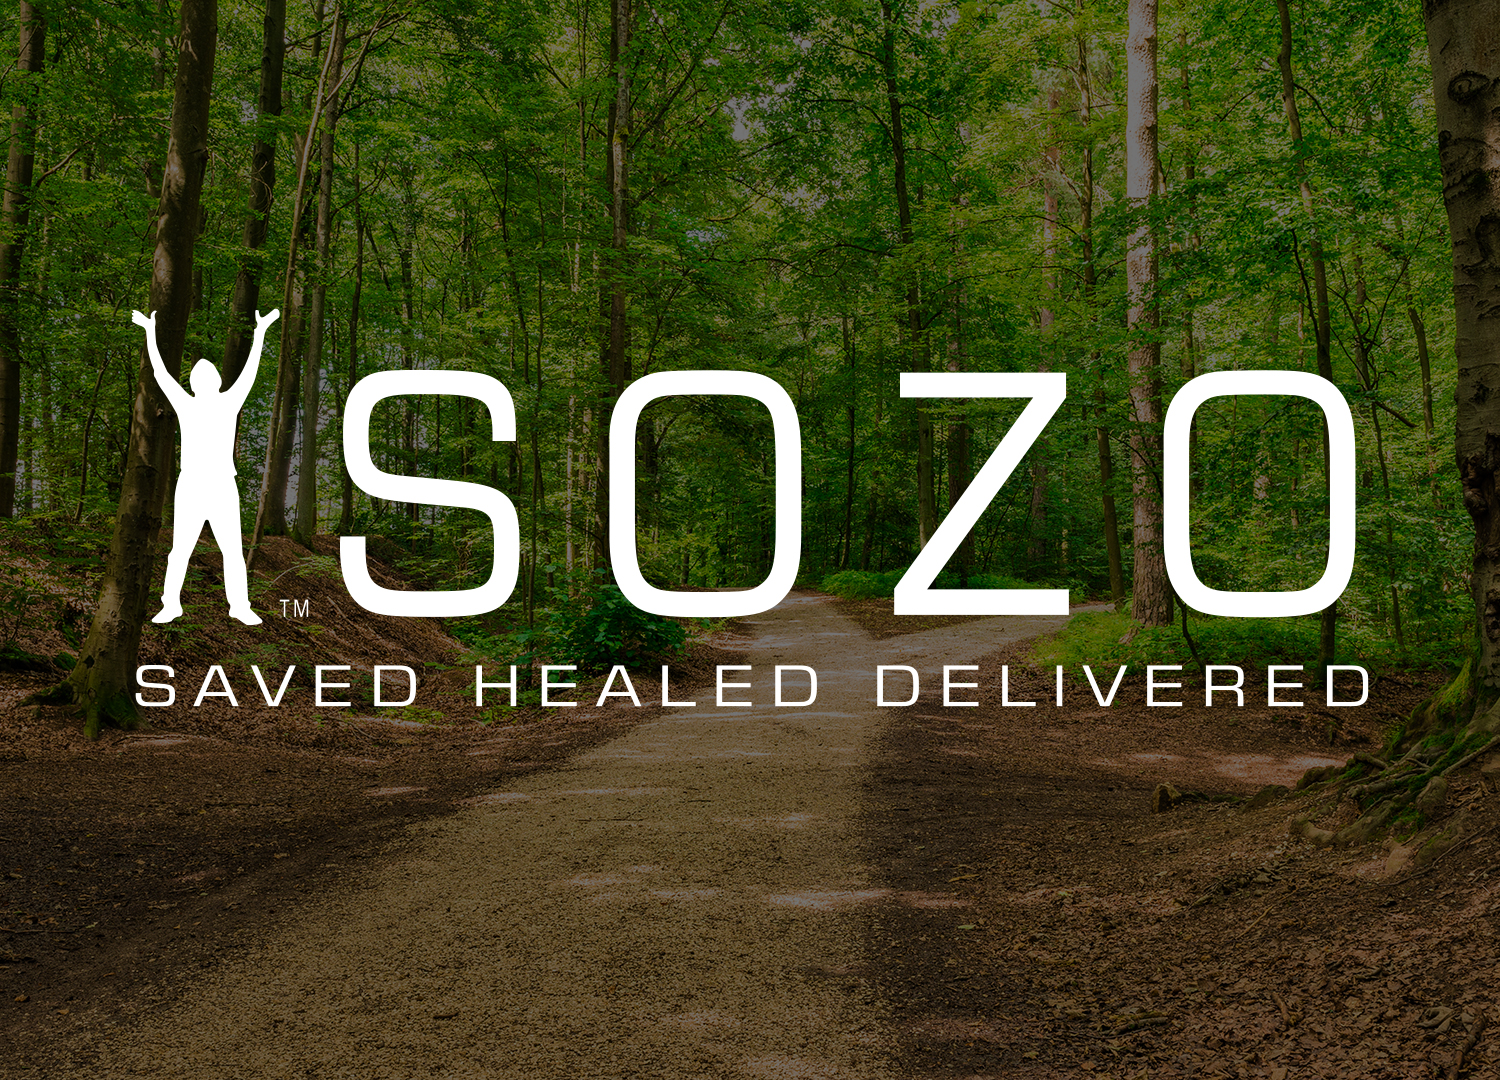 Overlaid logo: SOZO; Saved Healed Delivered, Background: A forked forest path